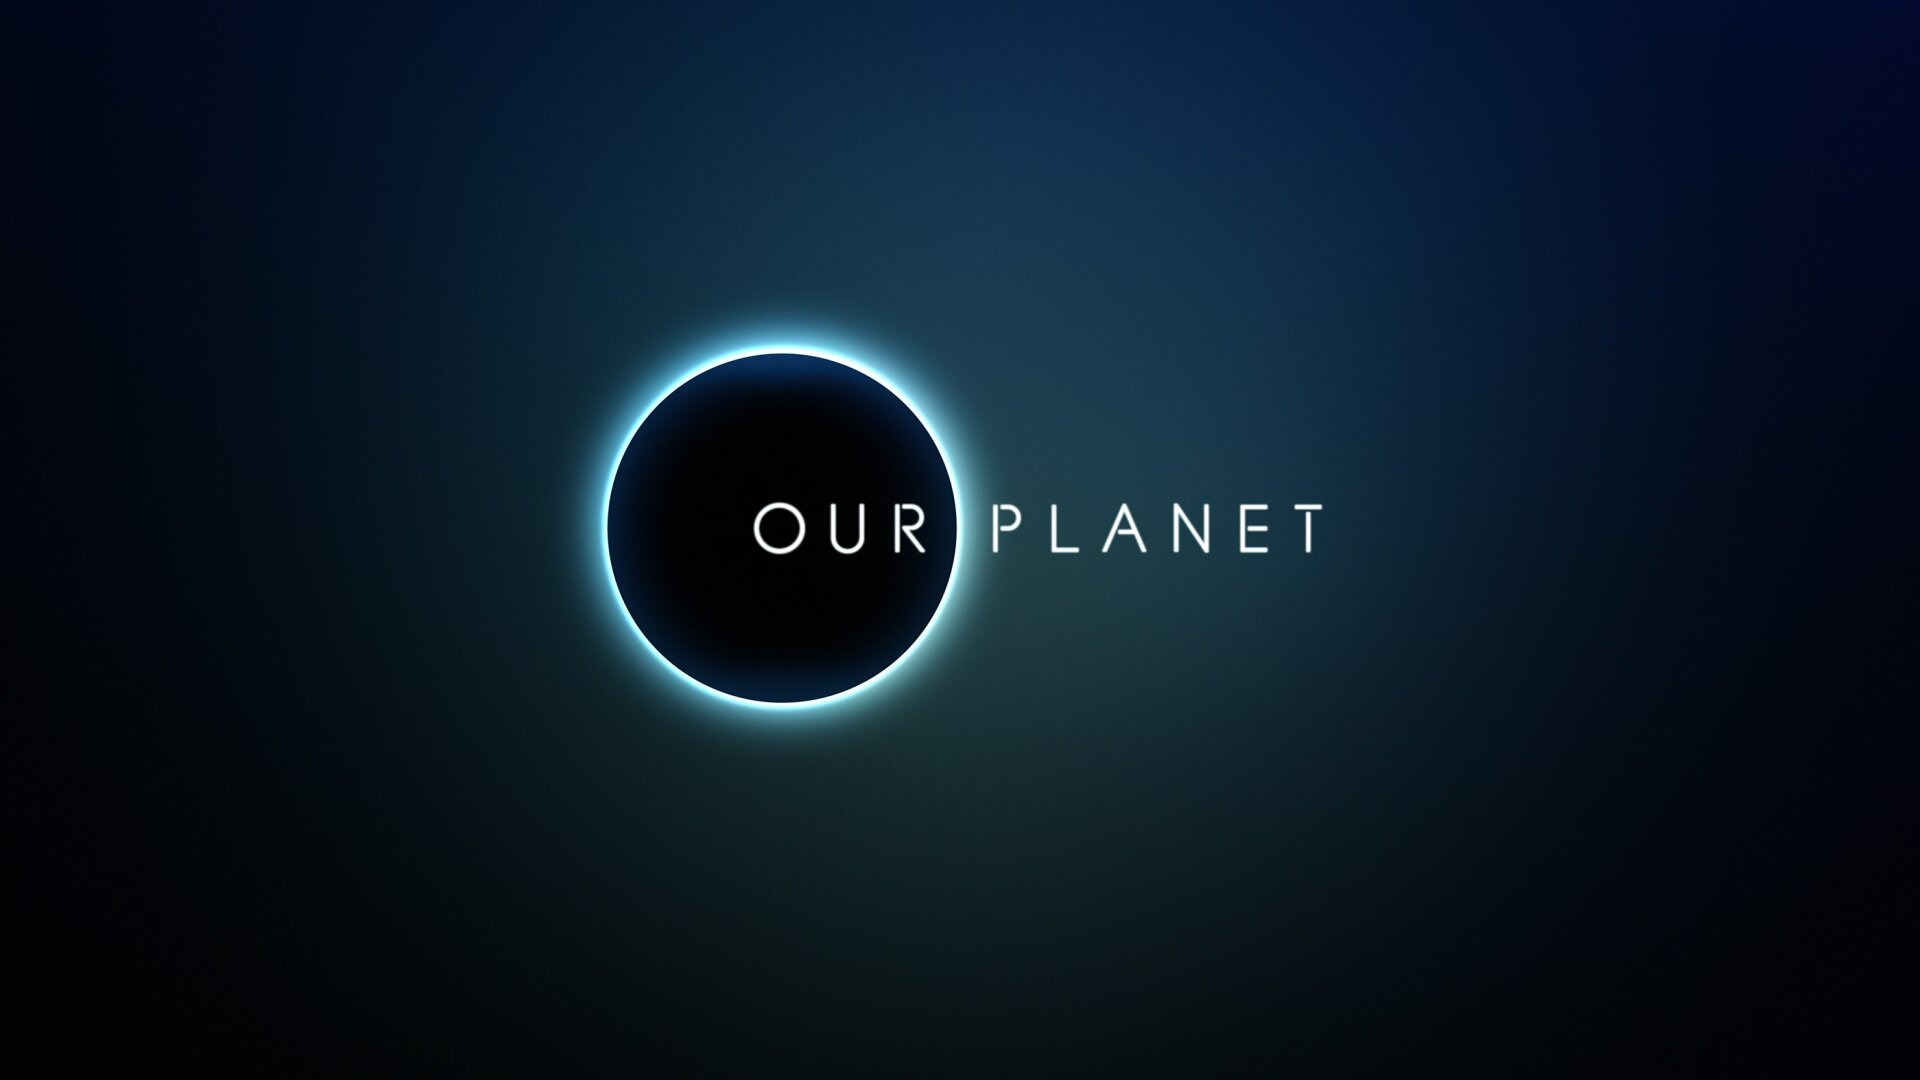 Show Our Planet